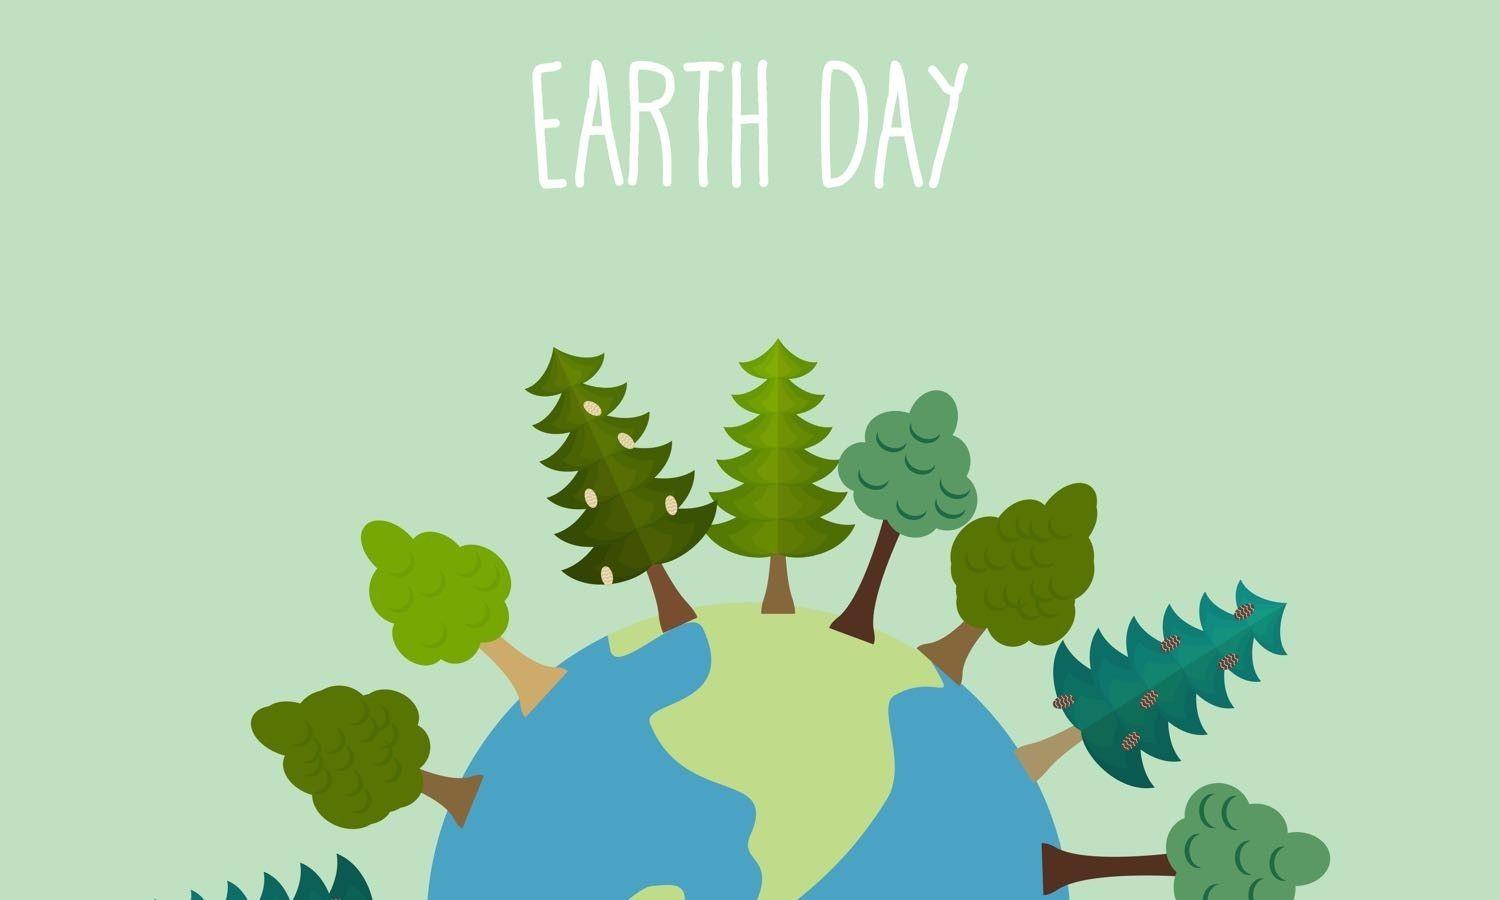 Earth Day Quotes, Poster, Image Facts 2017